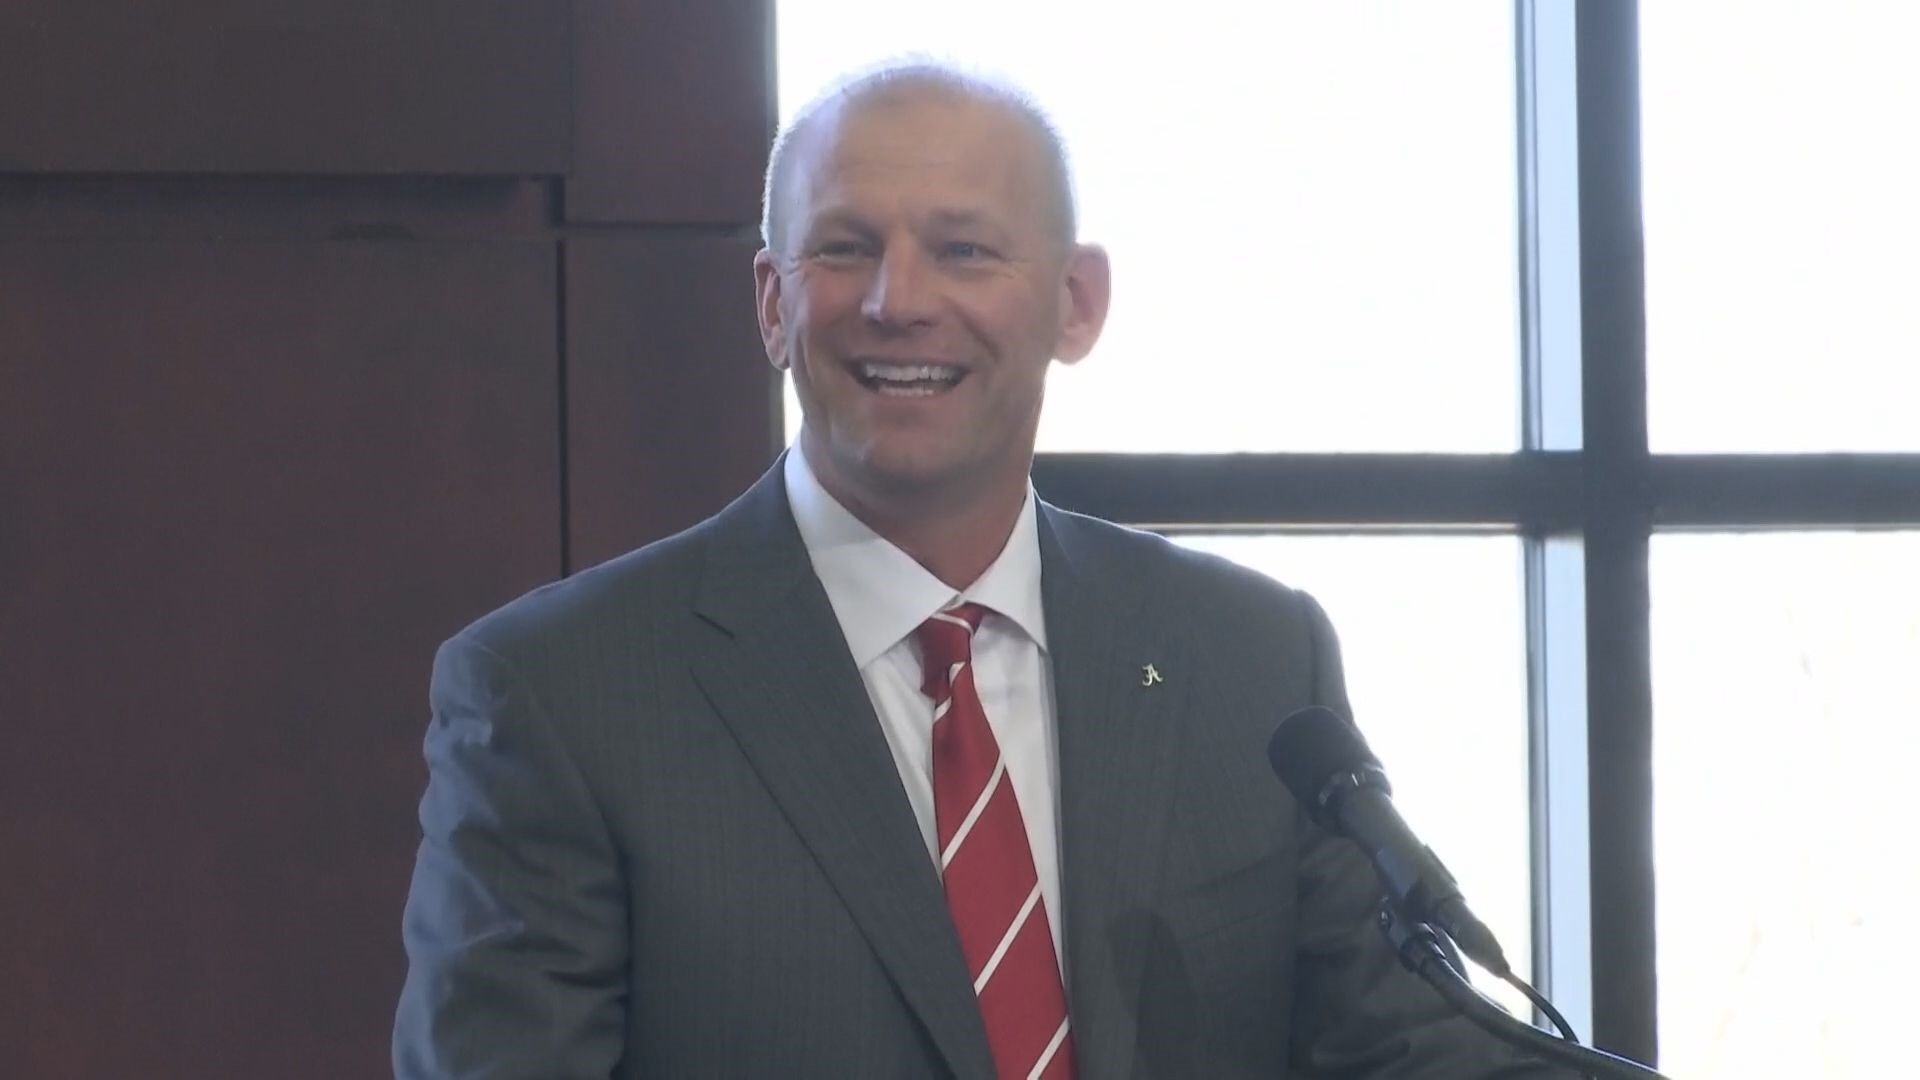 The University of Washington's former head coach Kalen DeBoer gives a speech in Tuscaloosa for the first time after taking over for Nick Saban at Alabama.